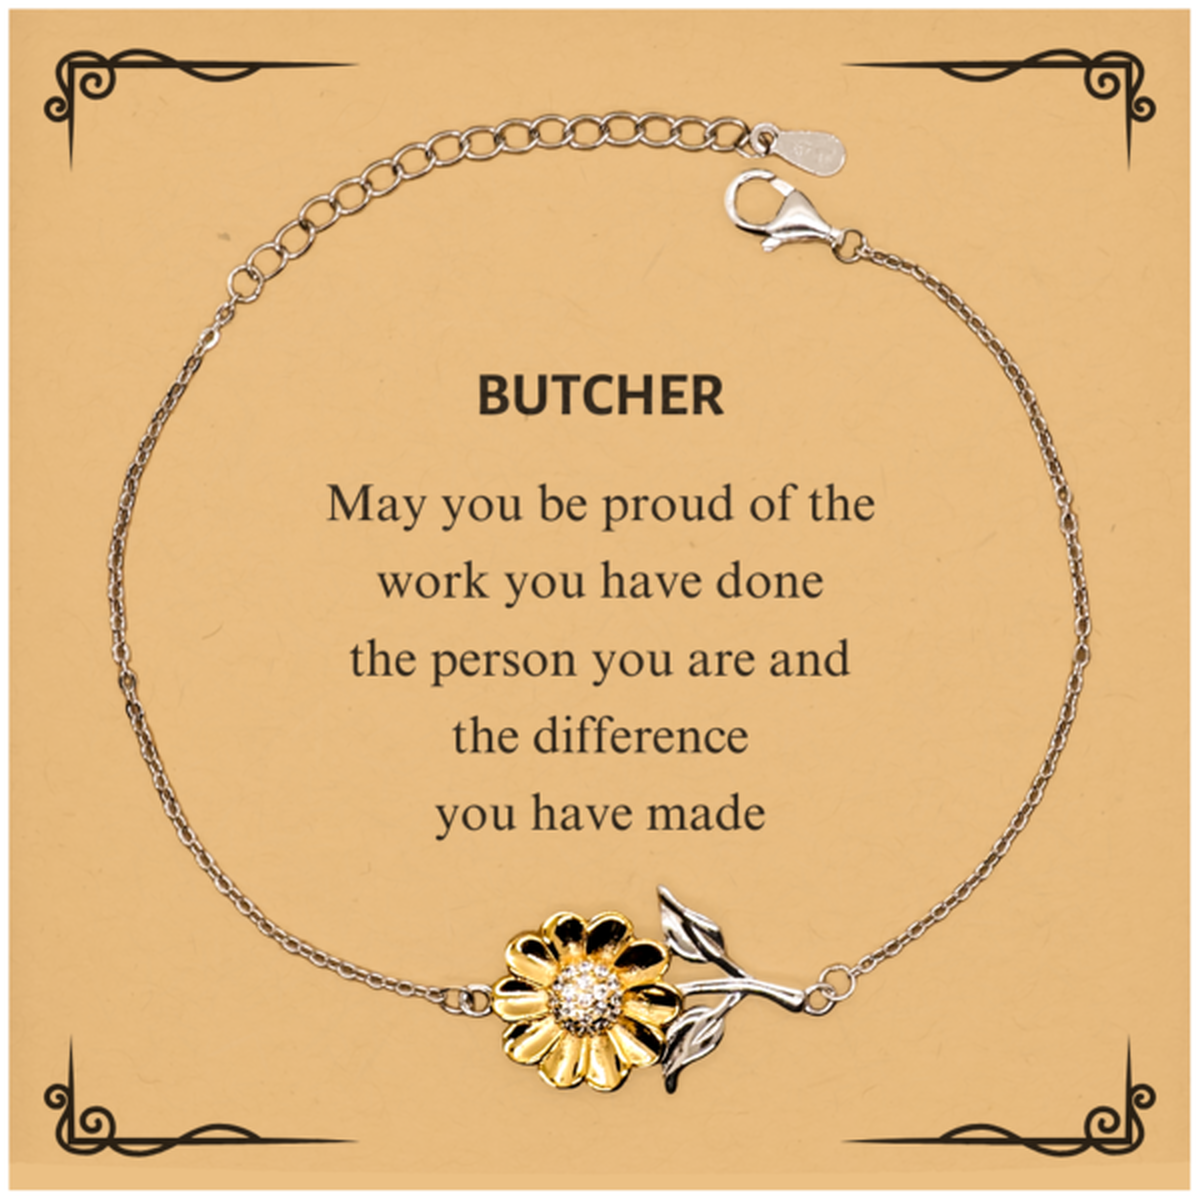 Butcher May you be proud of the work you have done, Retirement Butcher Sunflower Bracelet for Colleague Appreciation Gifts Amazing for Butcher